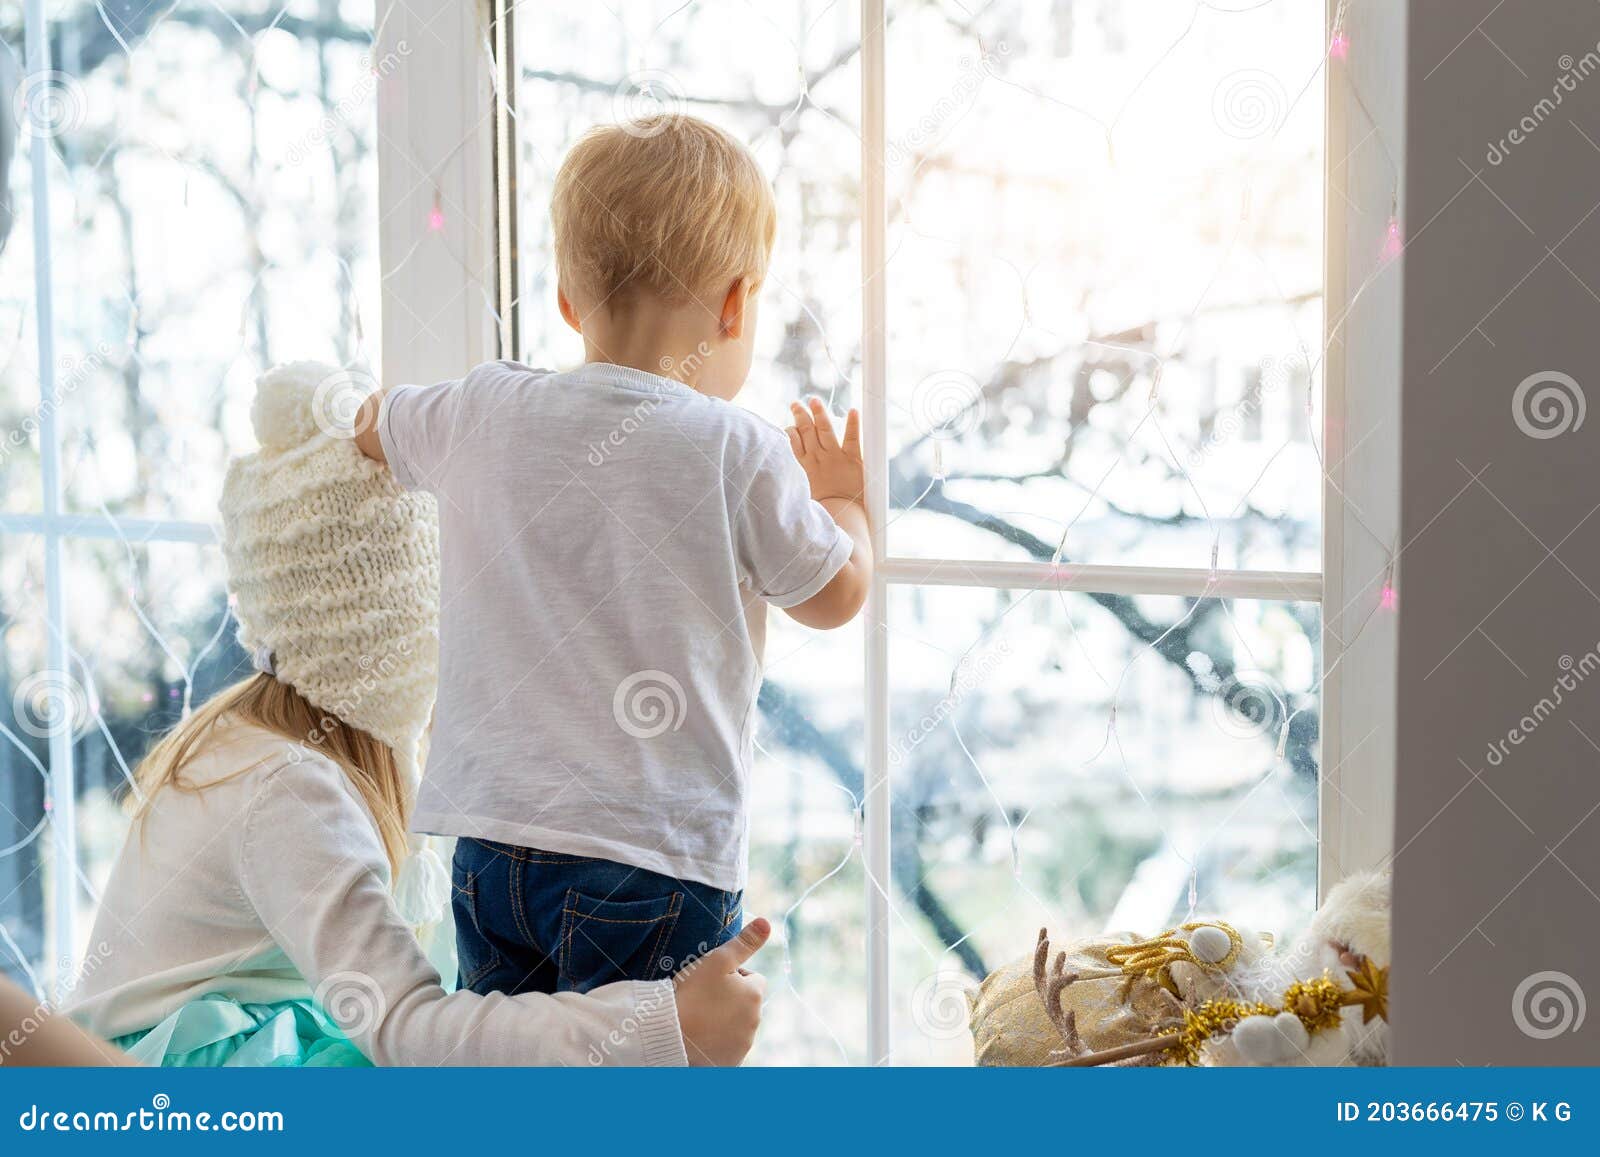 two cute adorable little blond cauasian children siblings stay near window and looking outside waiting for snow, wonders